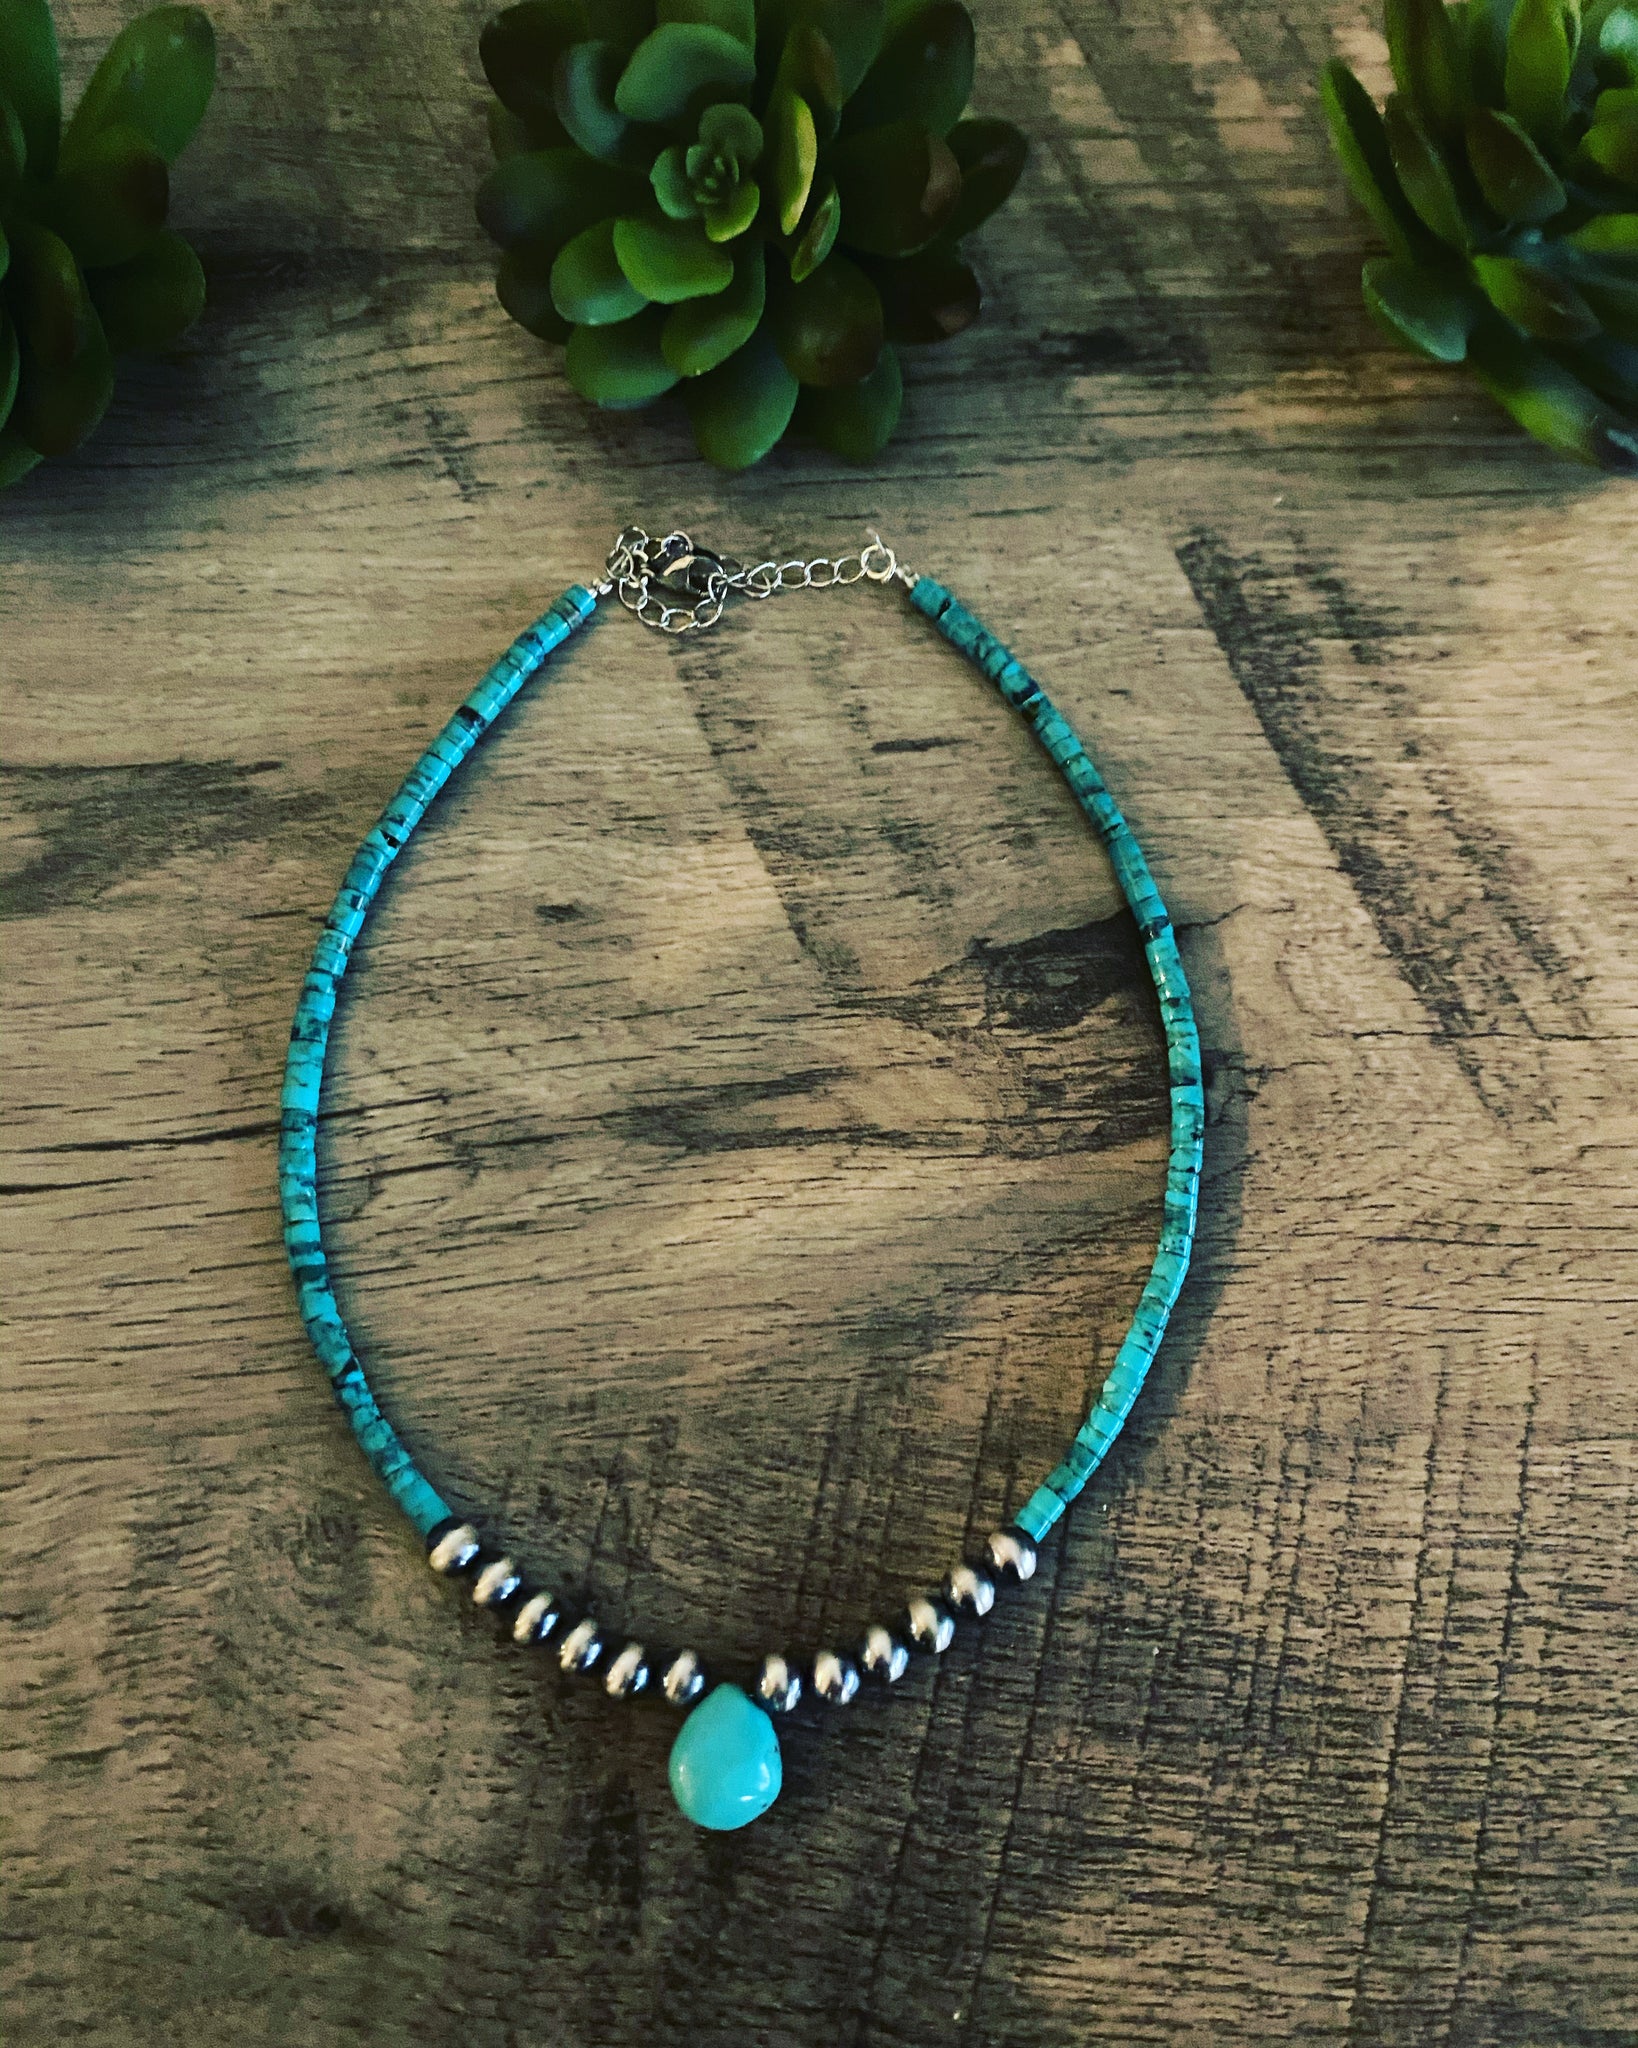 Navajo Pearl and Turquoise Heishi Choker - 14 inches long